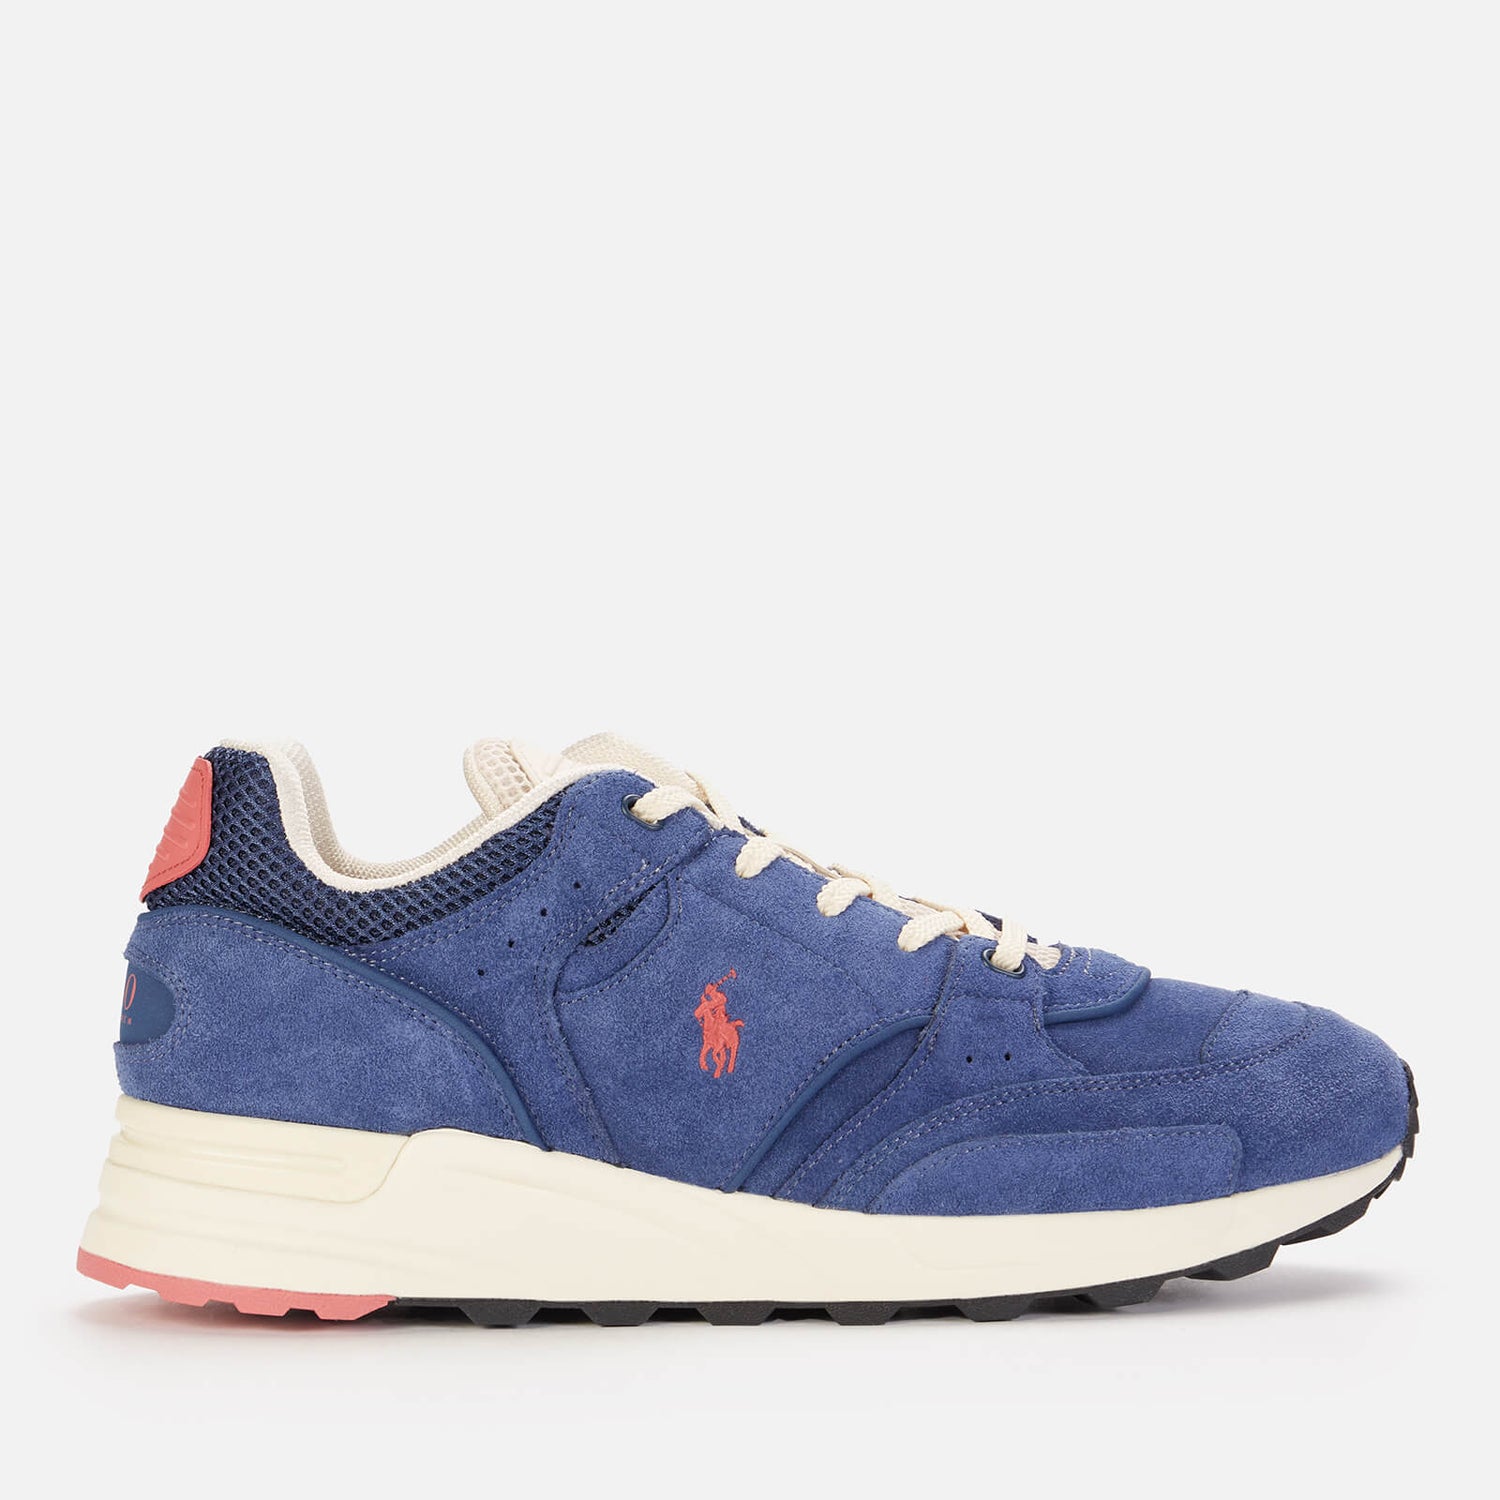 Polo Ralph Lauren Men's Trackster 200 Suede Running Style Trainers - Light Navy